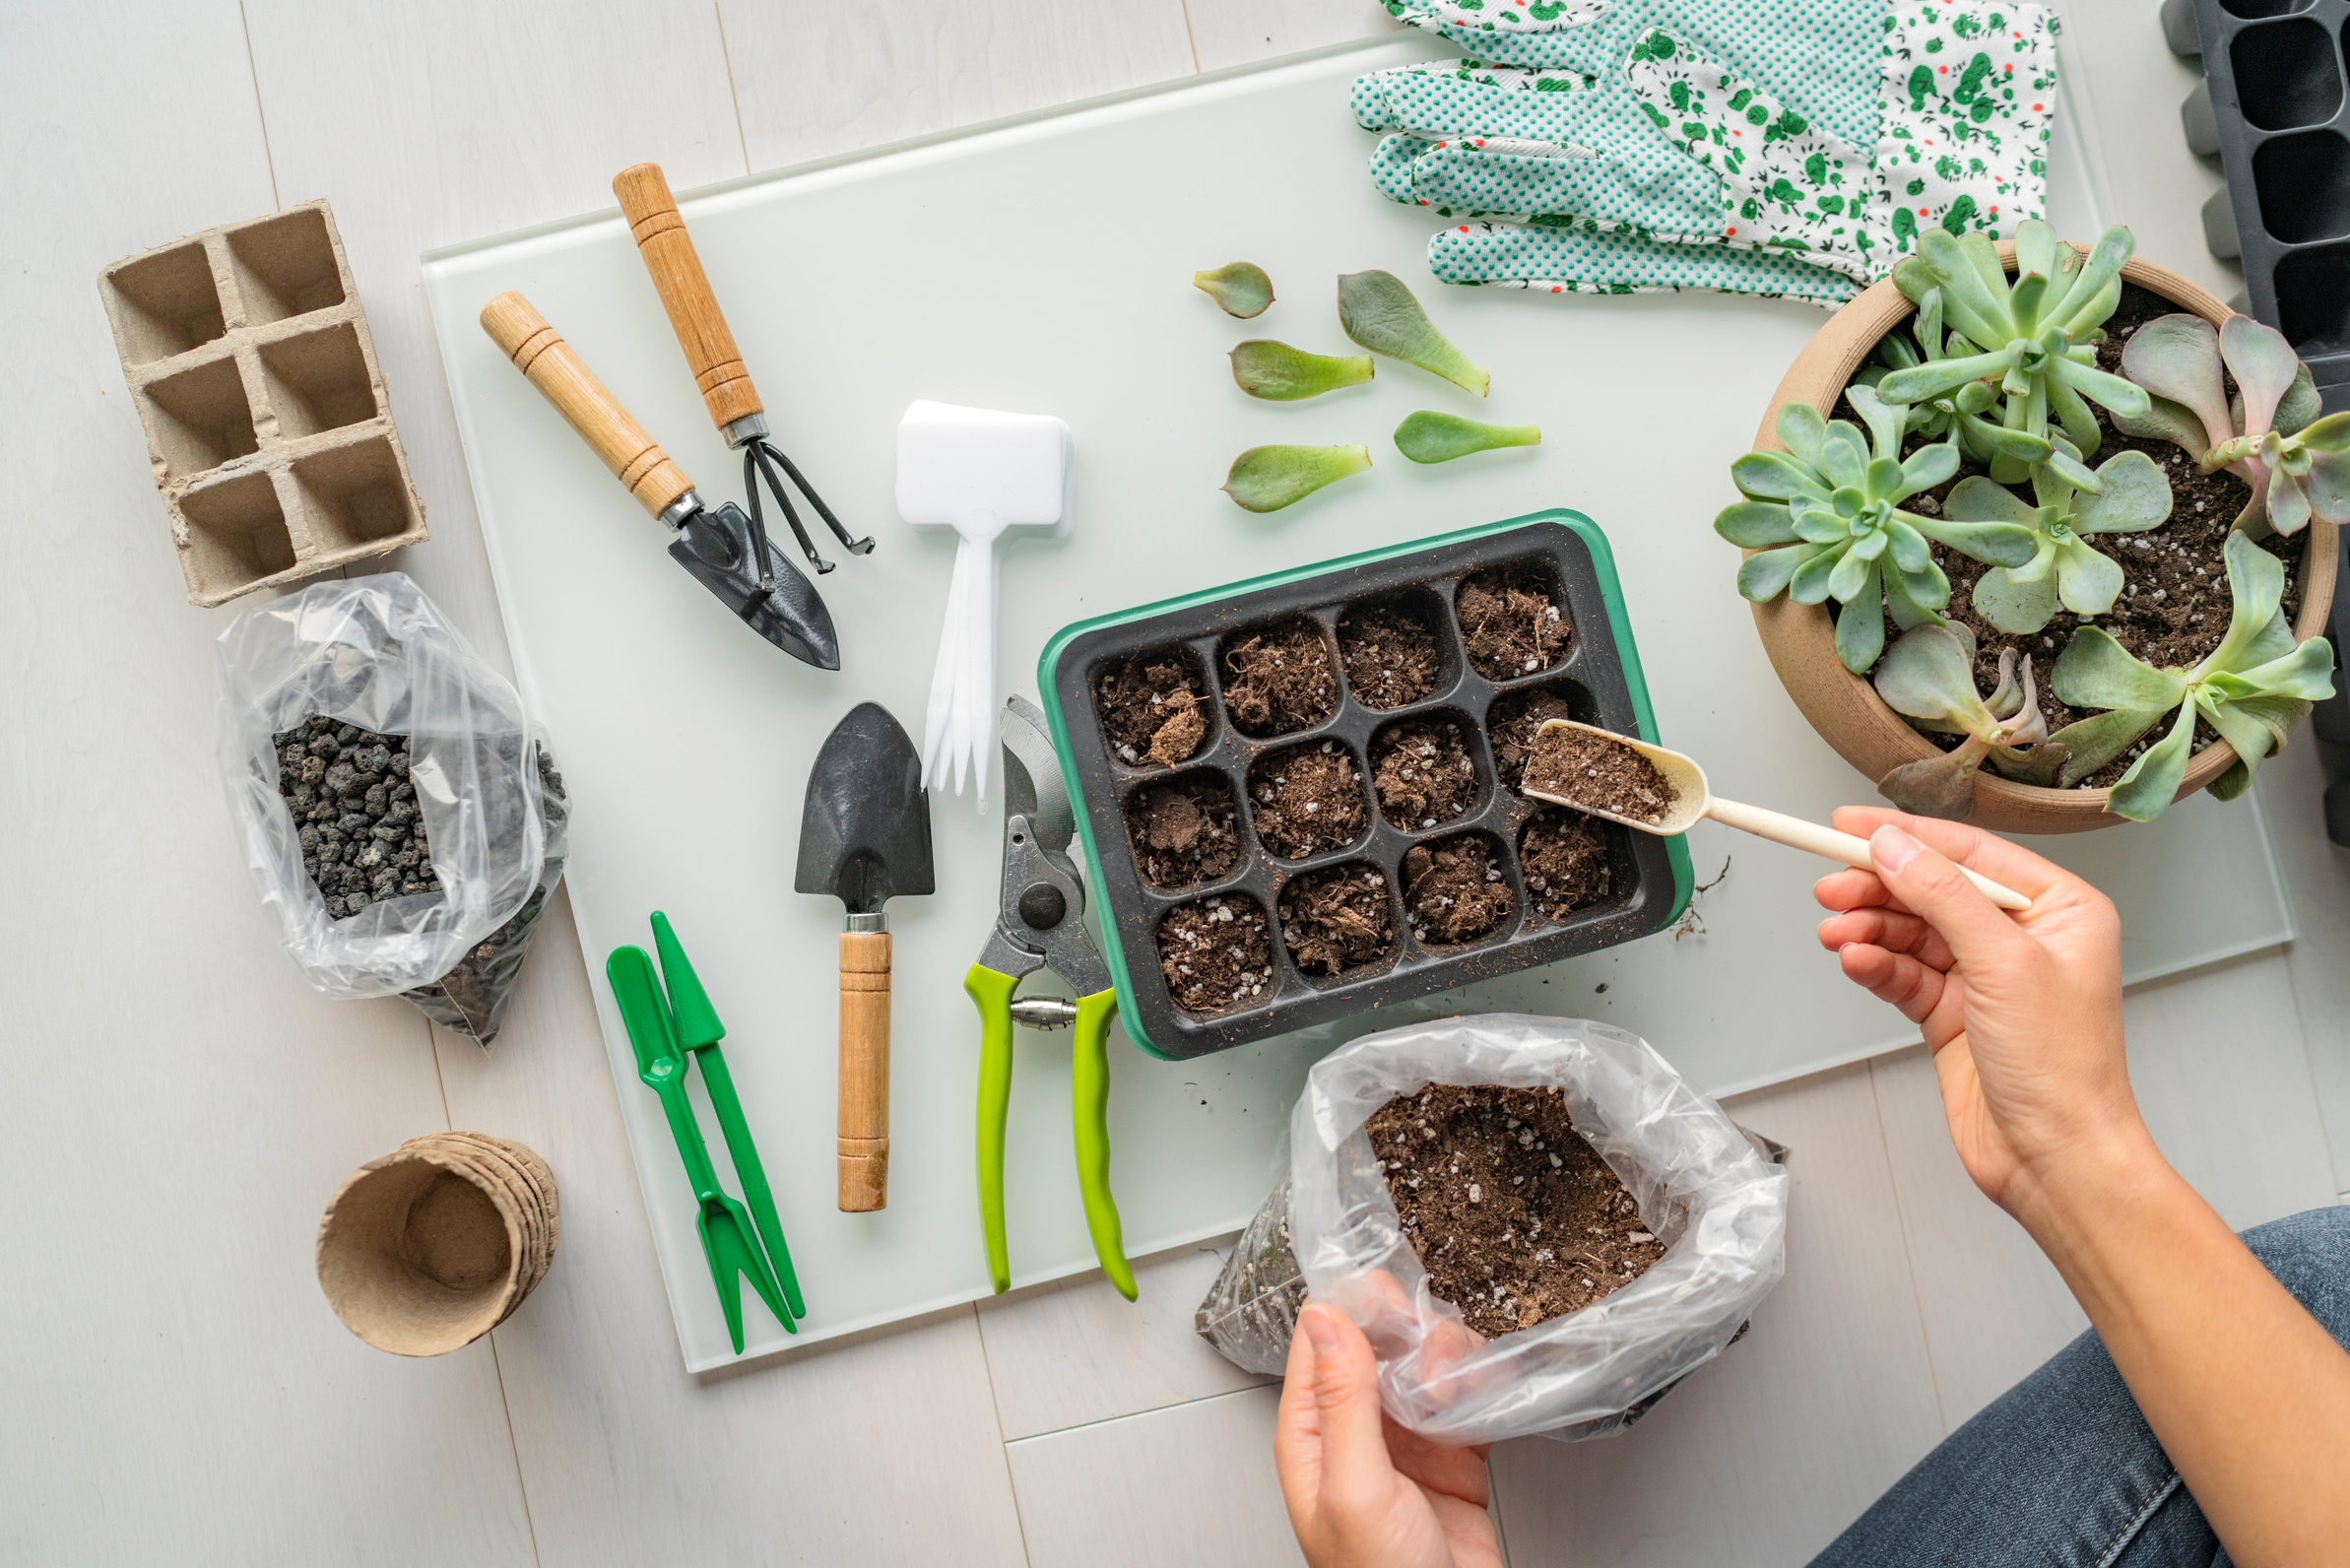 Home Gardening Seedling Growing Tray Plant Propagation for Summer Indoor Garden. Woman Using Garden Tools inside Apartment.